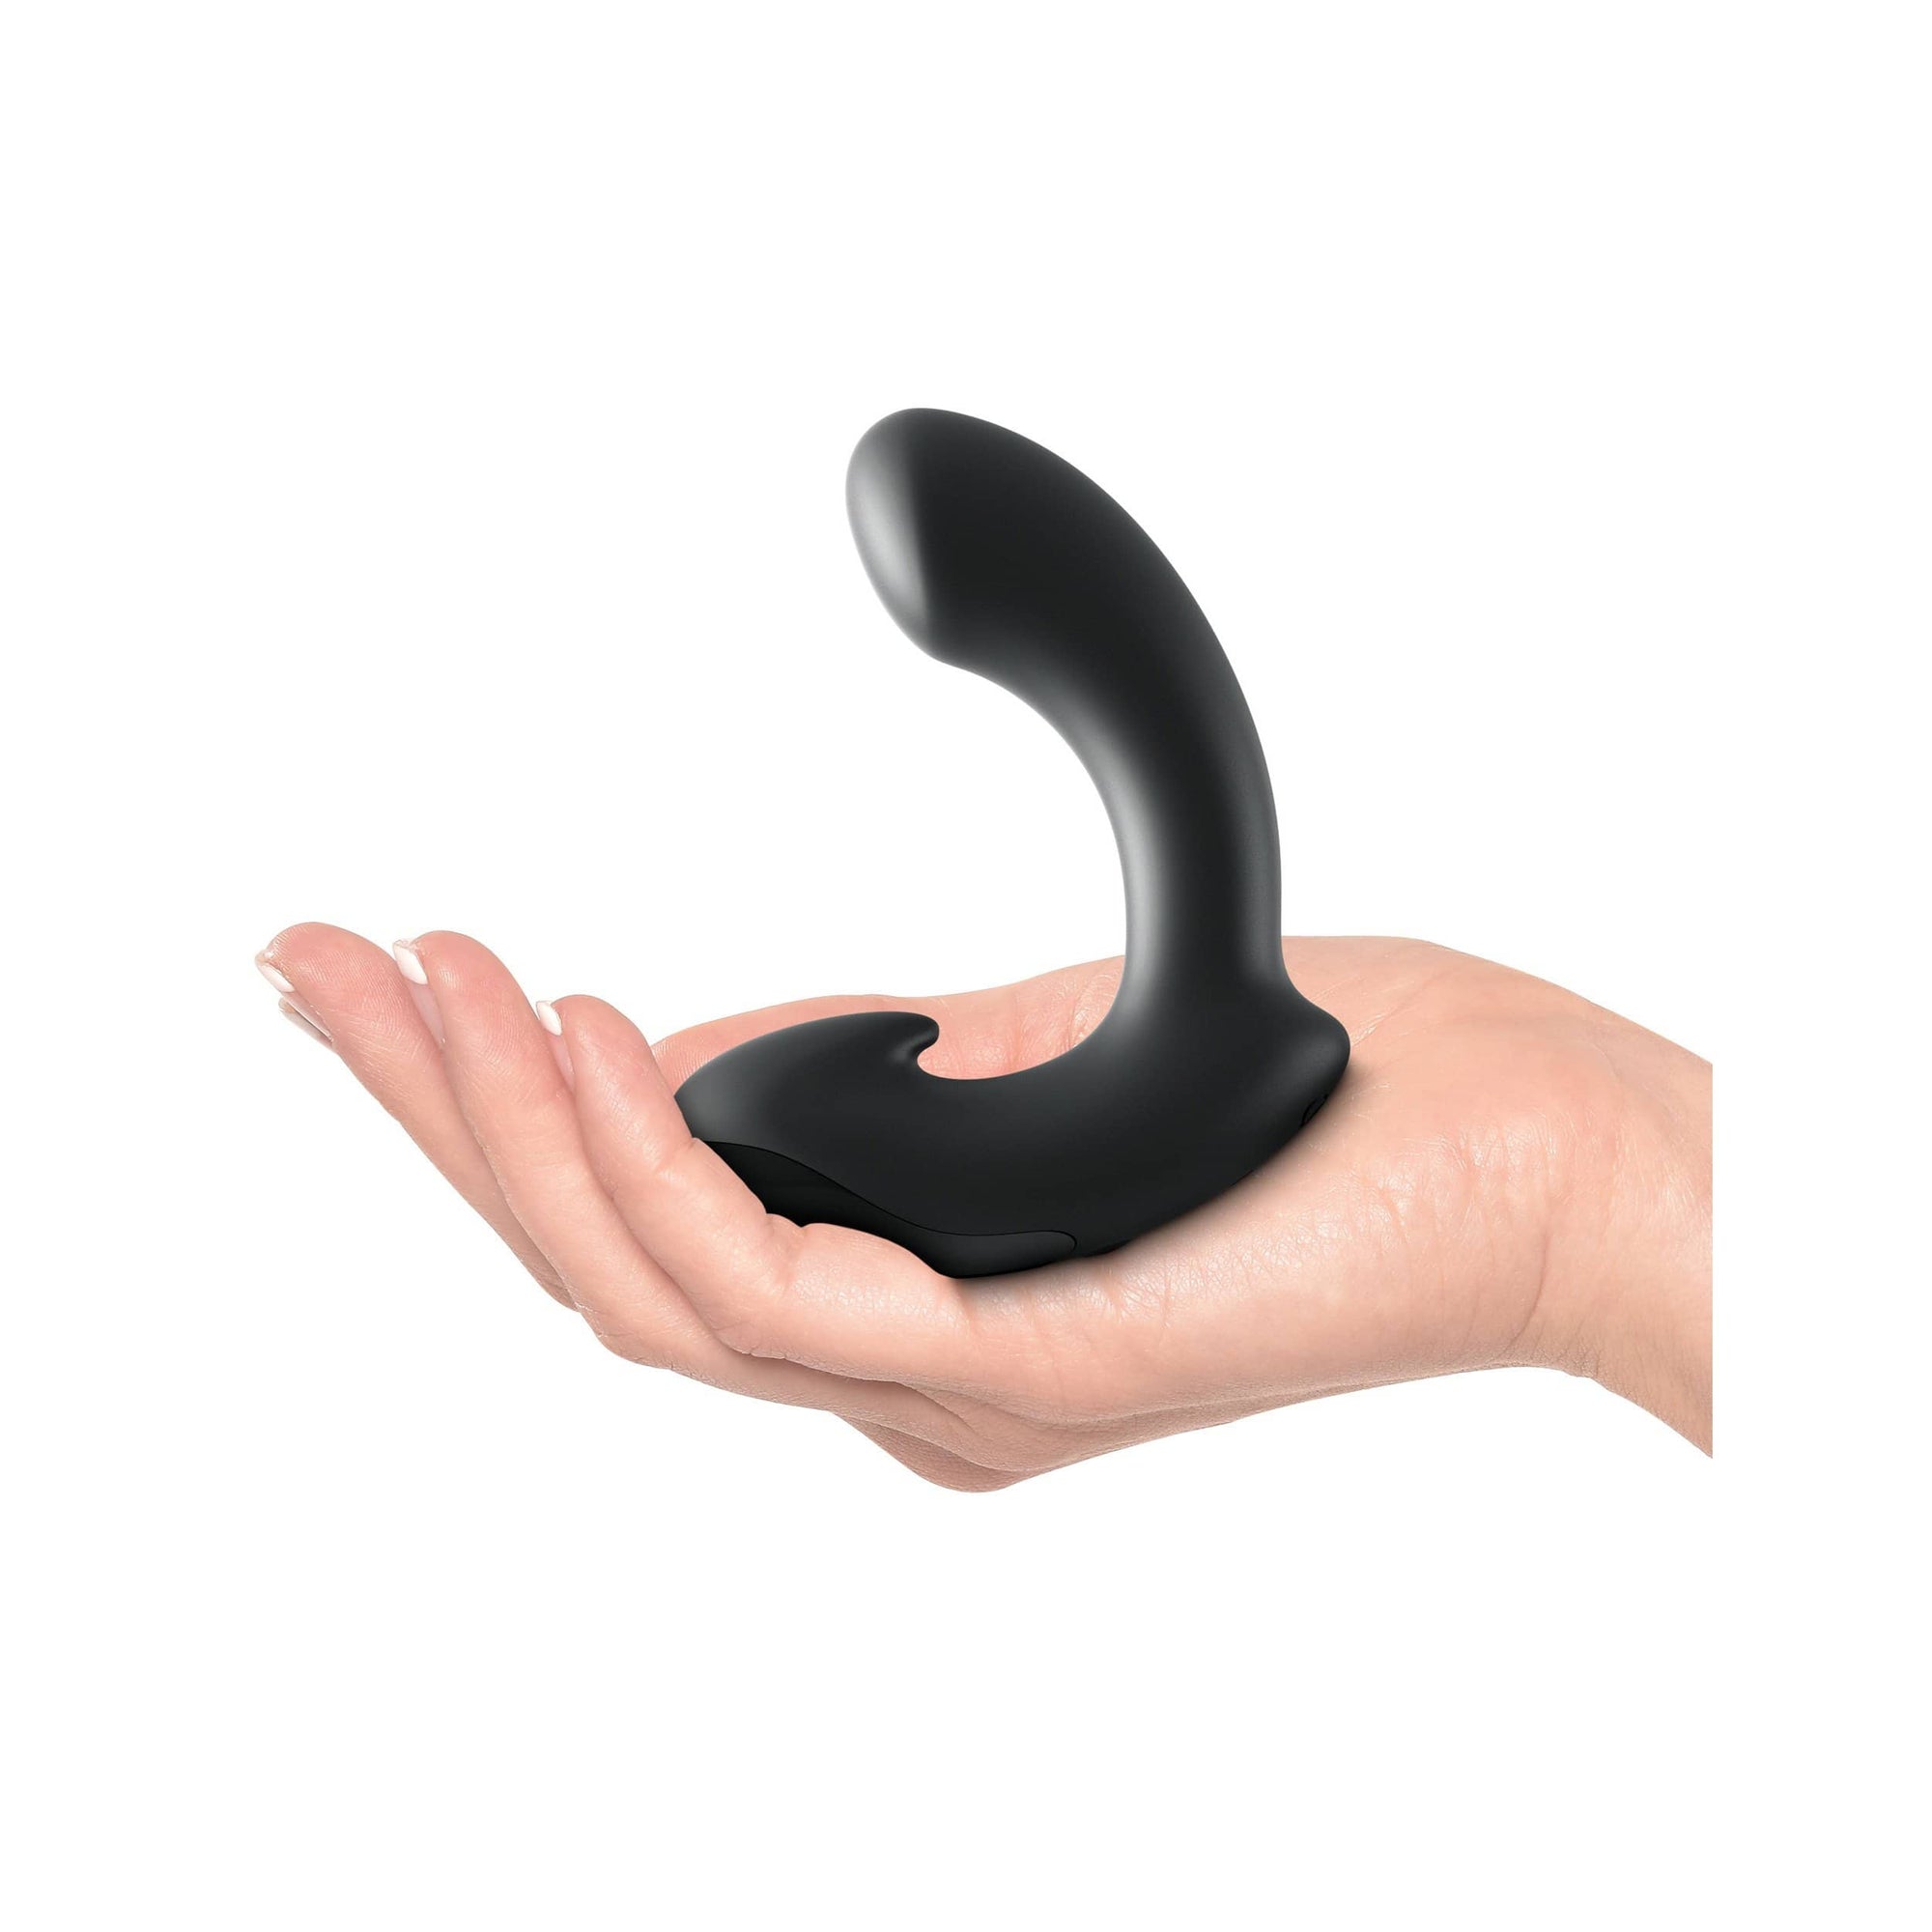 Sir Richards - Control Silicone P-Spot Massager (Black)